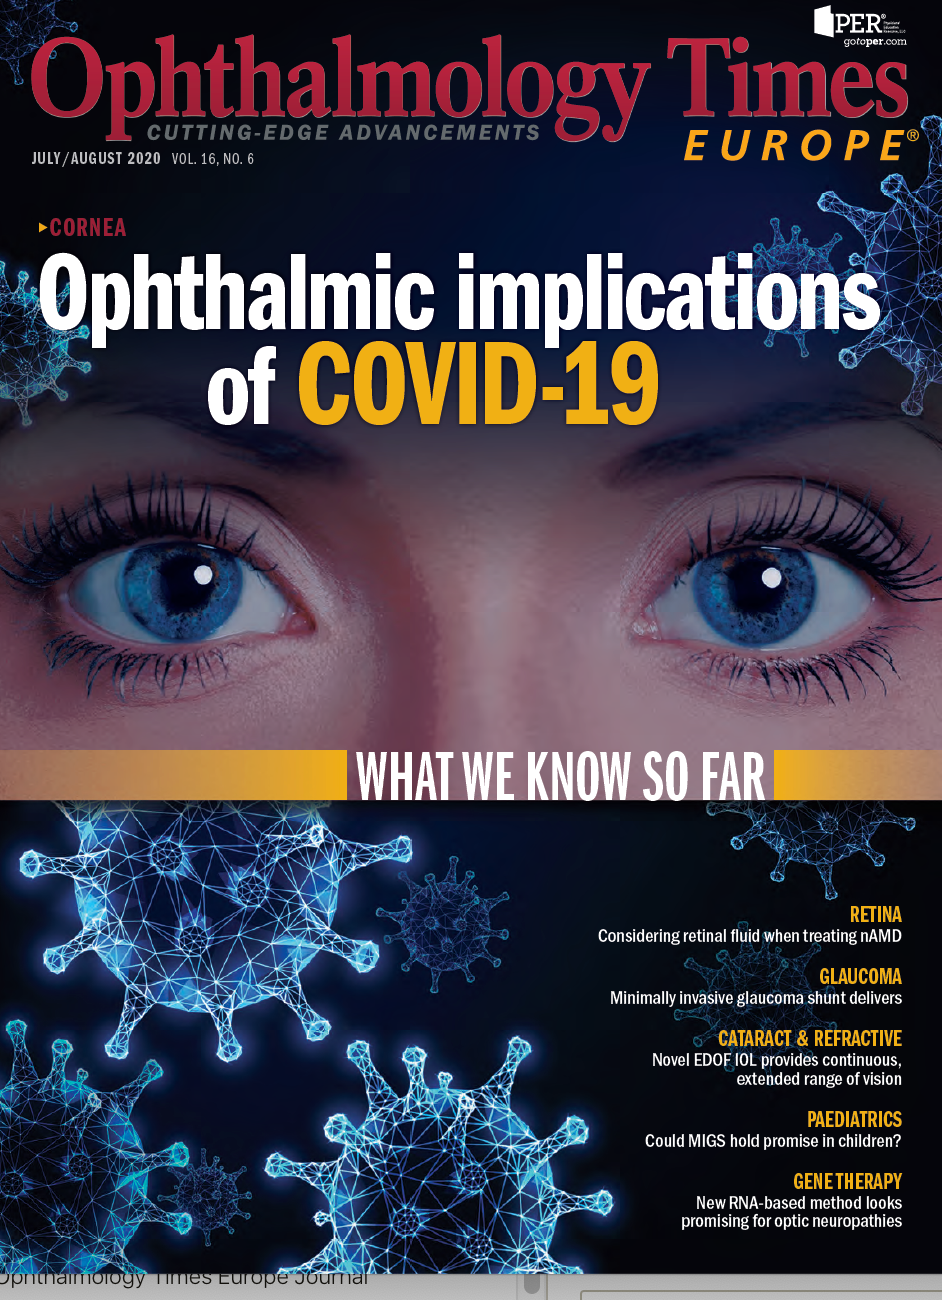 Ophthalmology Times Europe July/August 2020